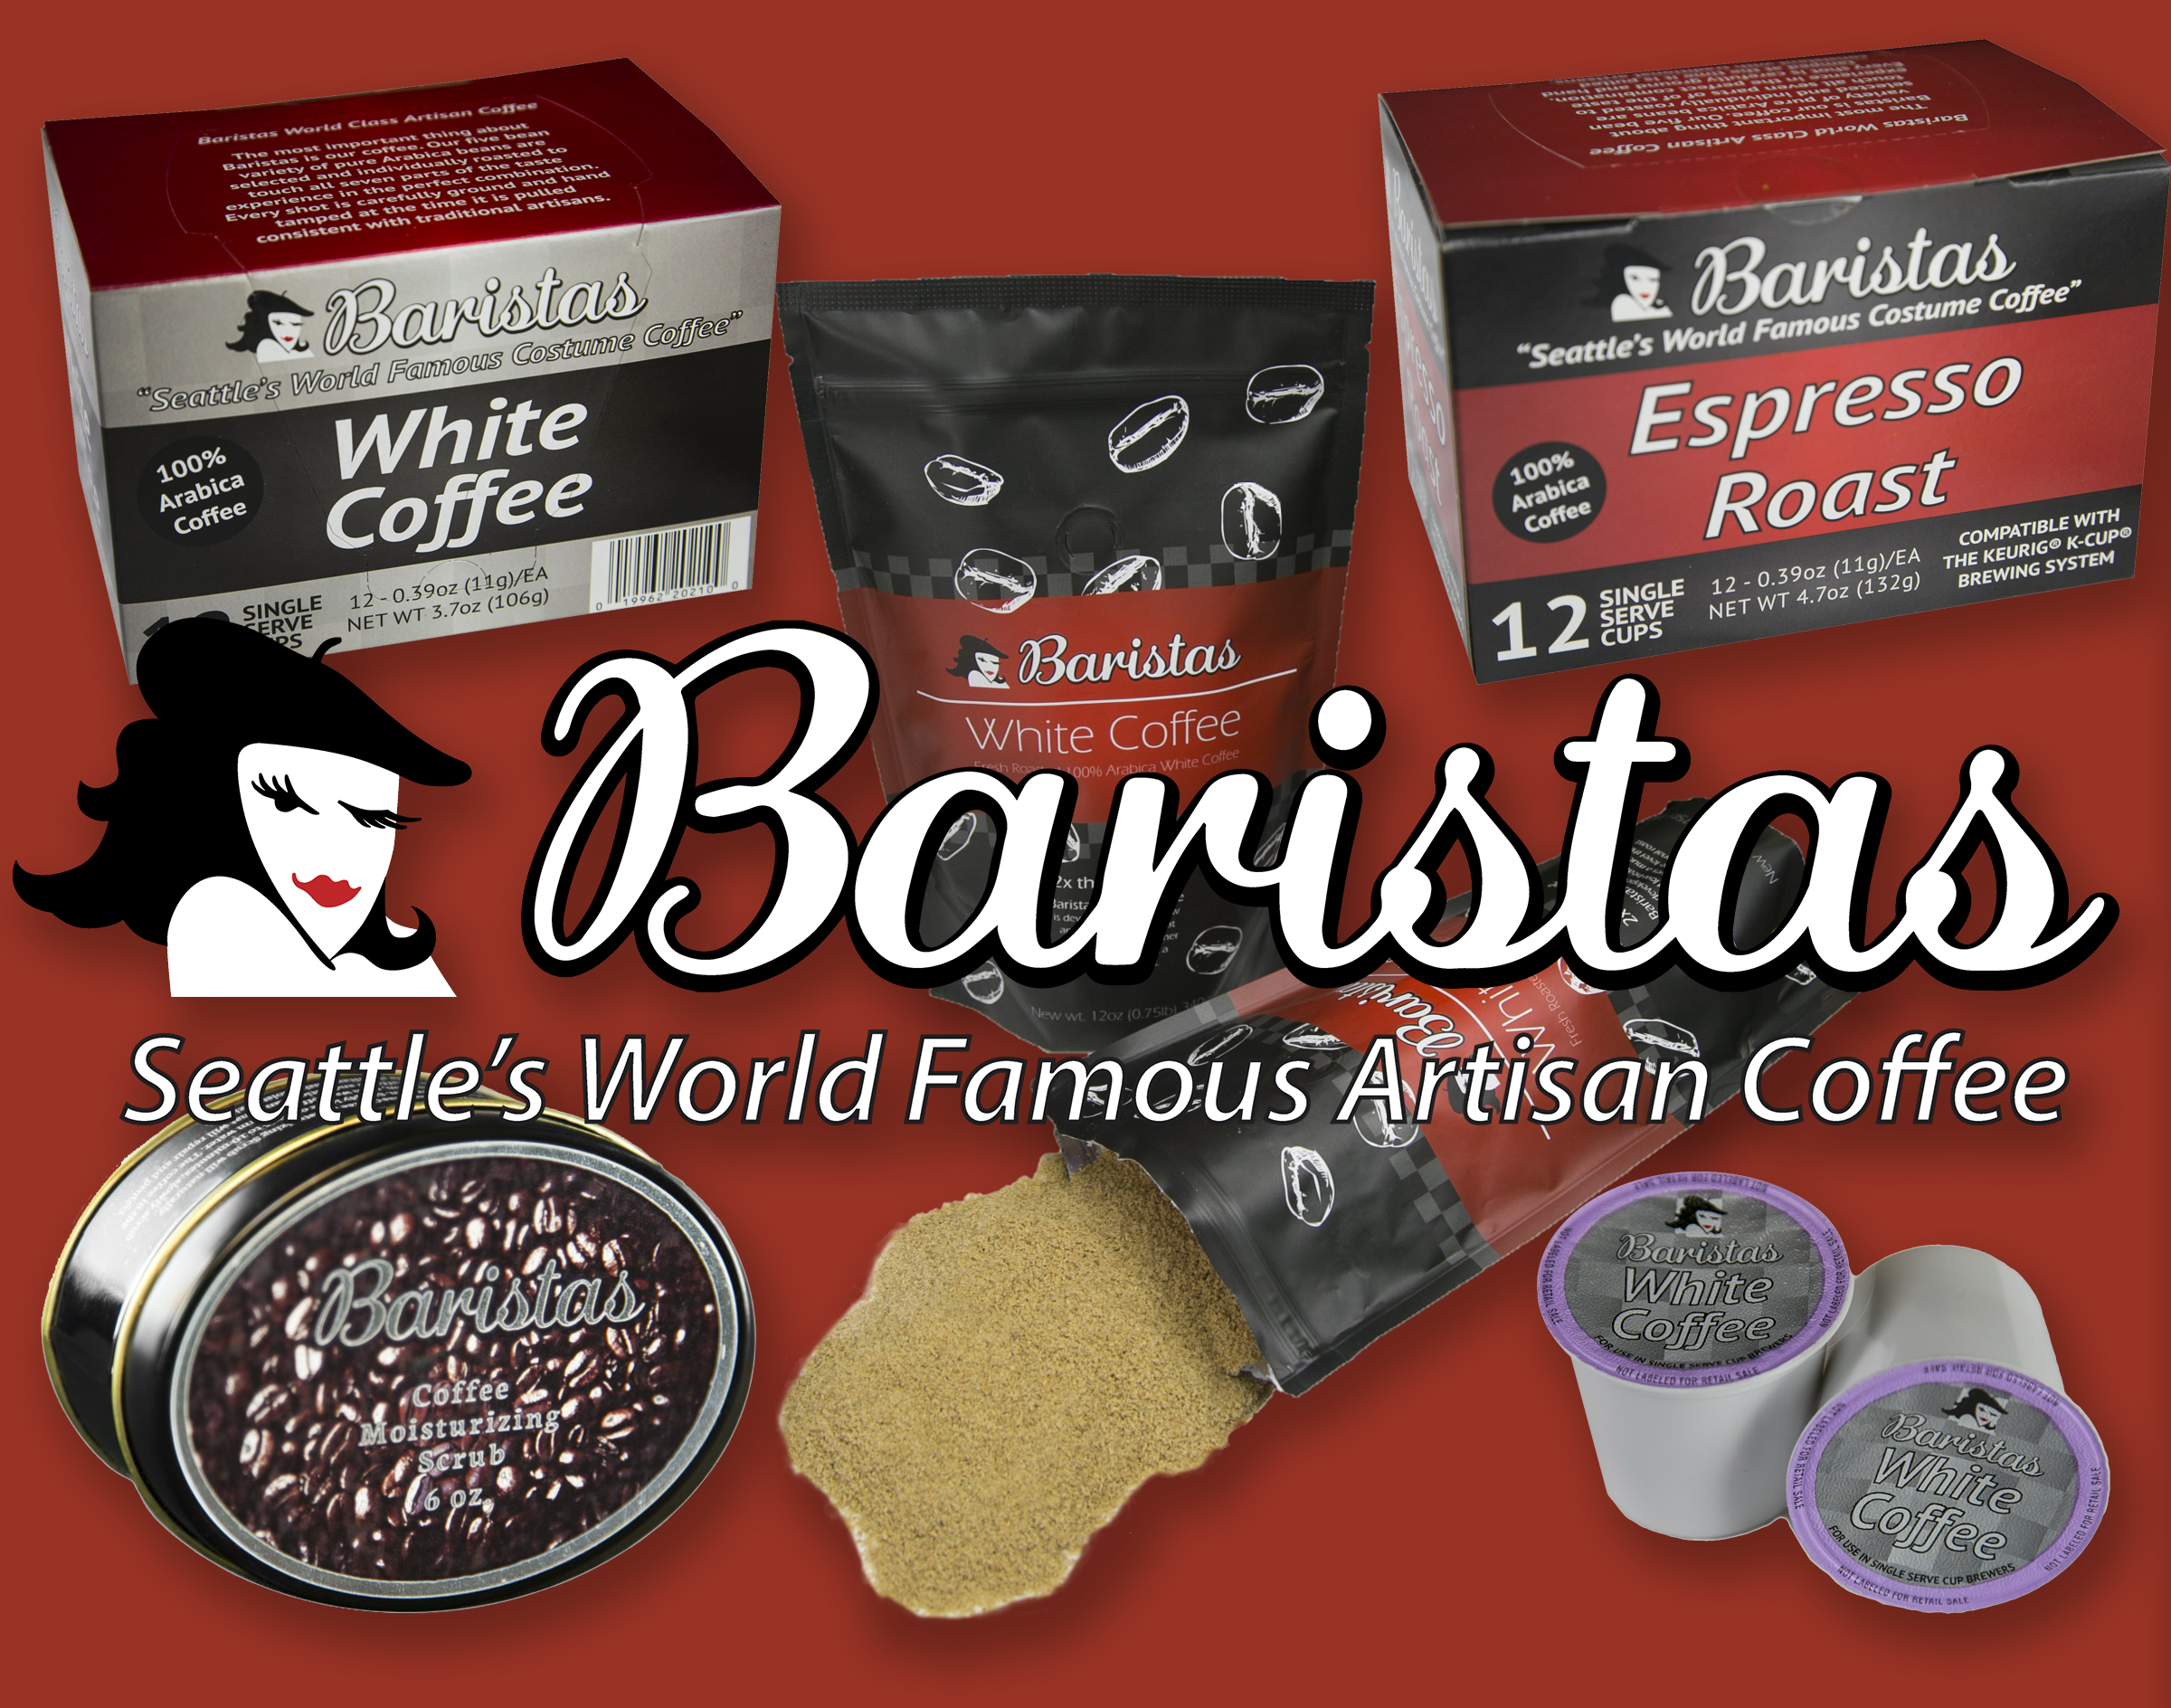 Baristas Coffee Company Inc, Wednesday, September 11, 2019, Press release picture